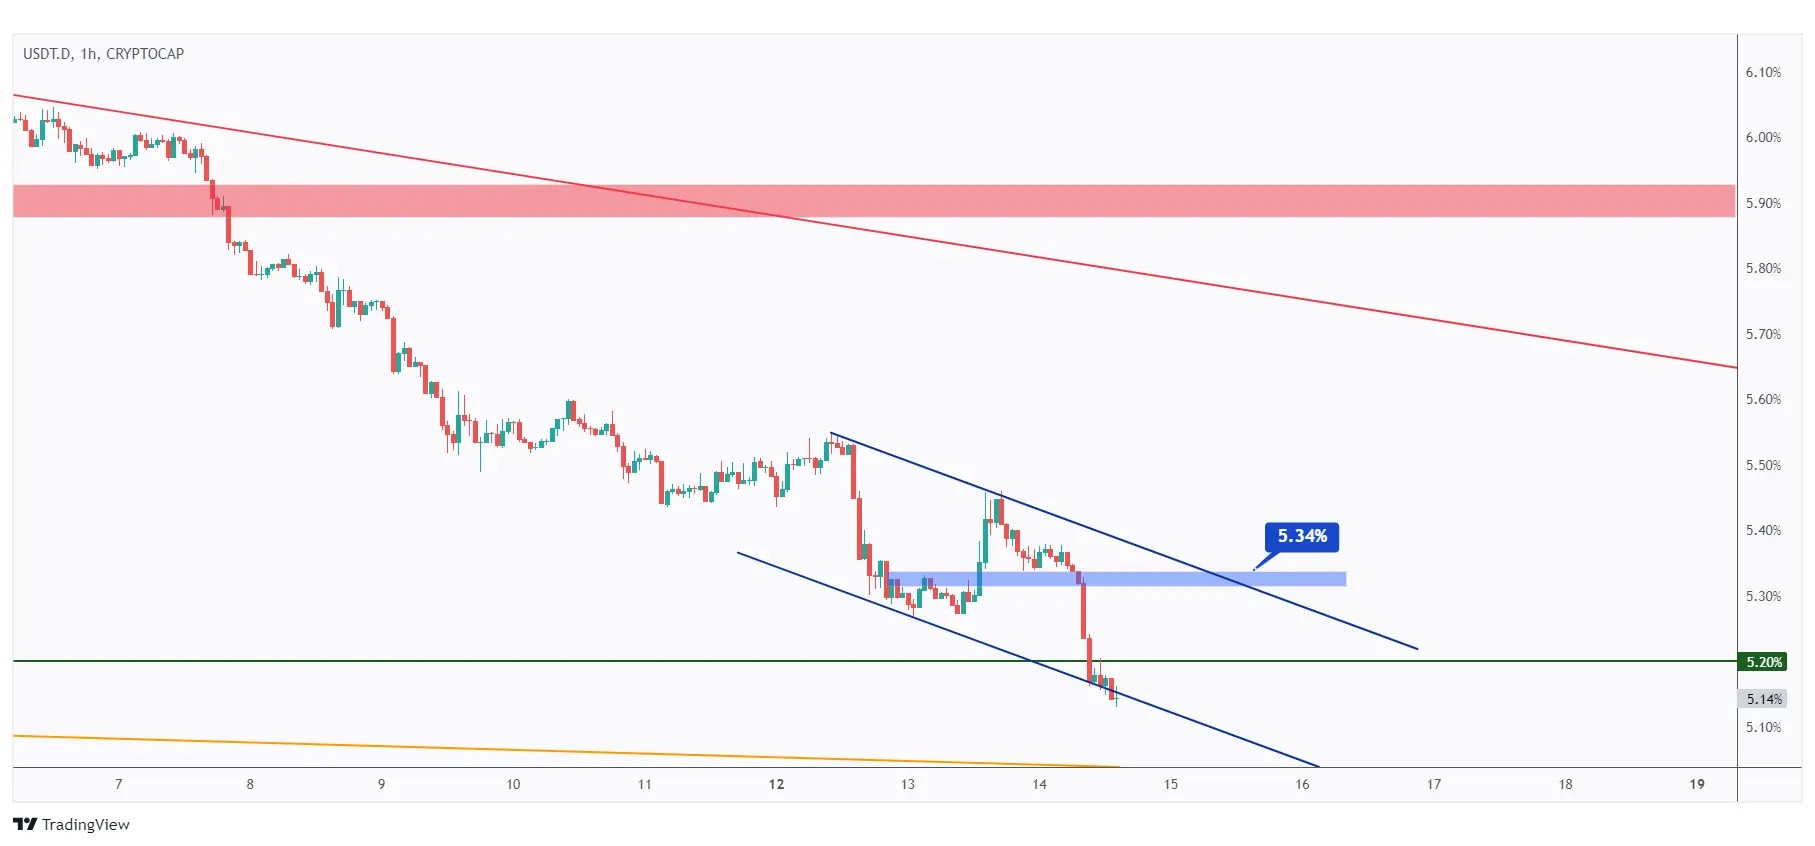 USDT dominance 1h chart bearish trading inside the falling channel and currently around the lower bound of it.